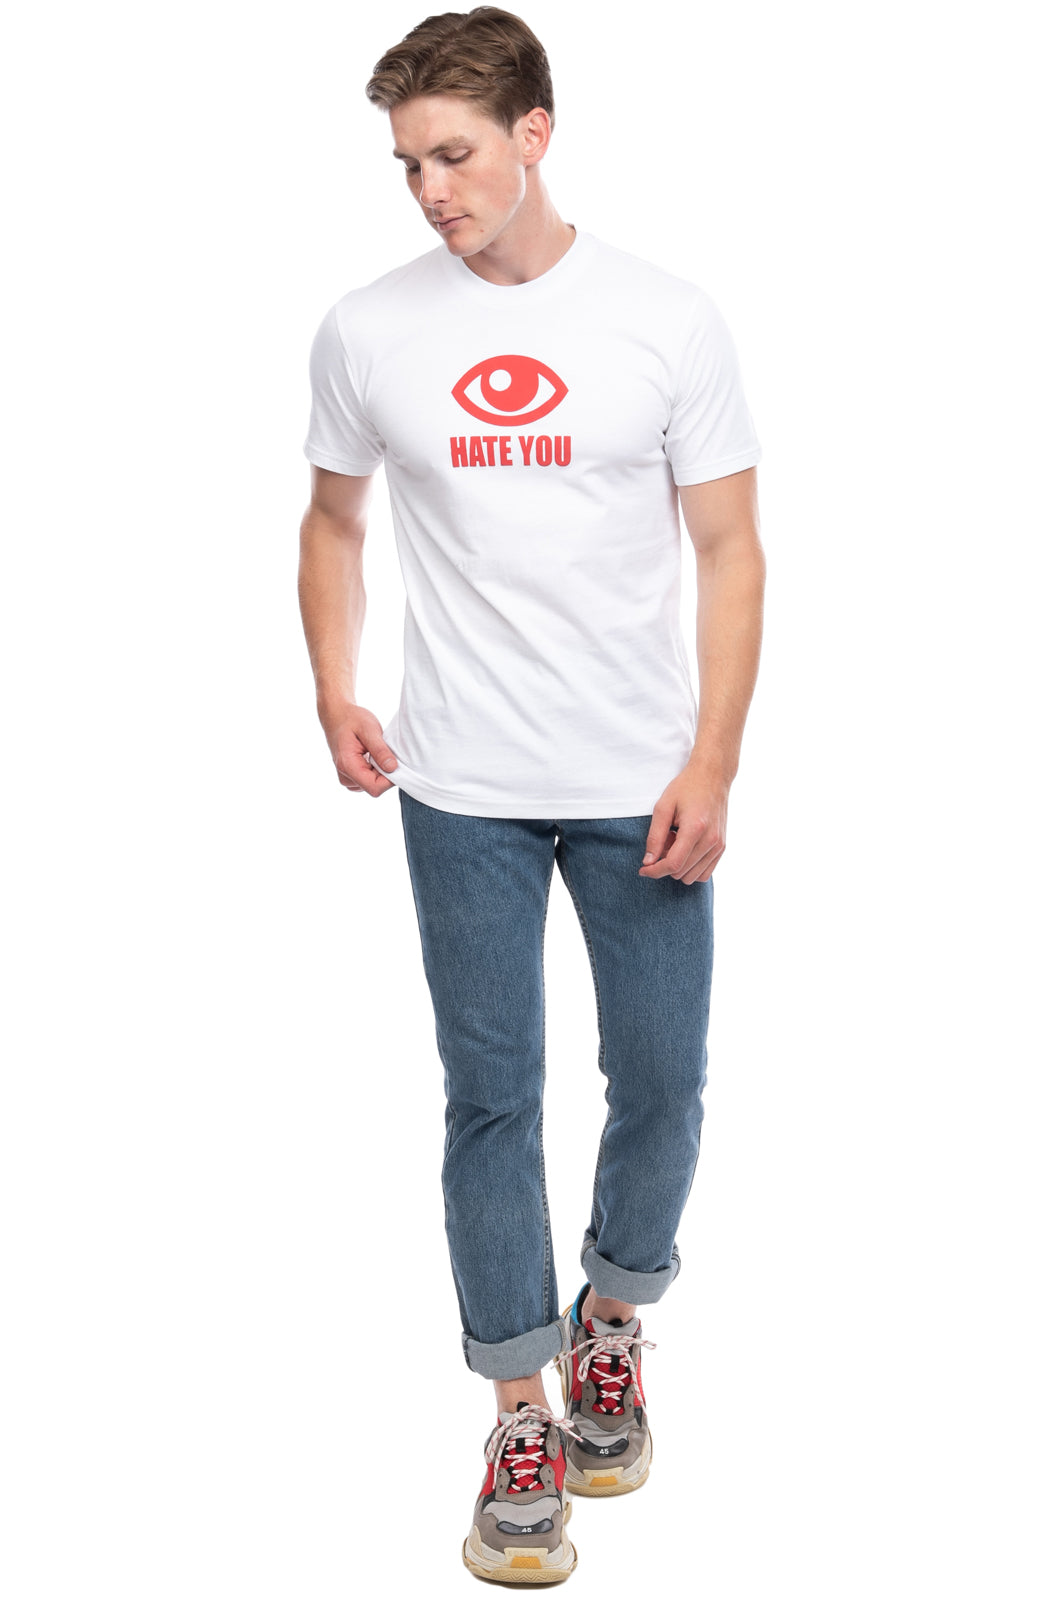 CHINATOWN MARKET T-Shirt Top Size M Coated Eye & HATE YOU Short Sleeve Crew Neck gallery main photo